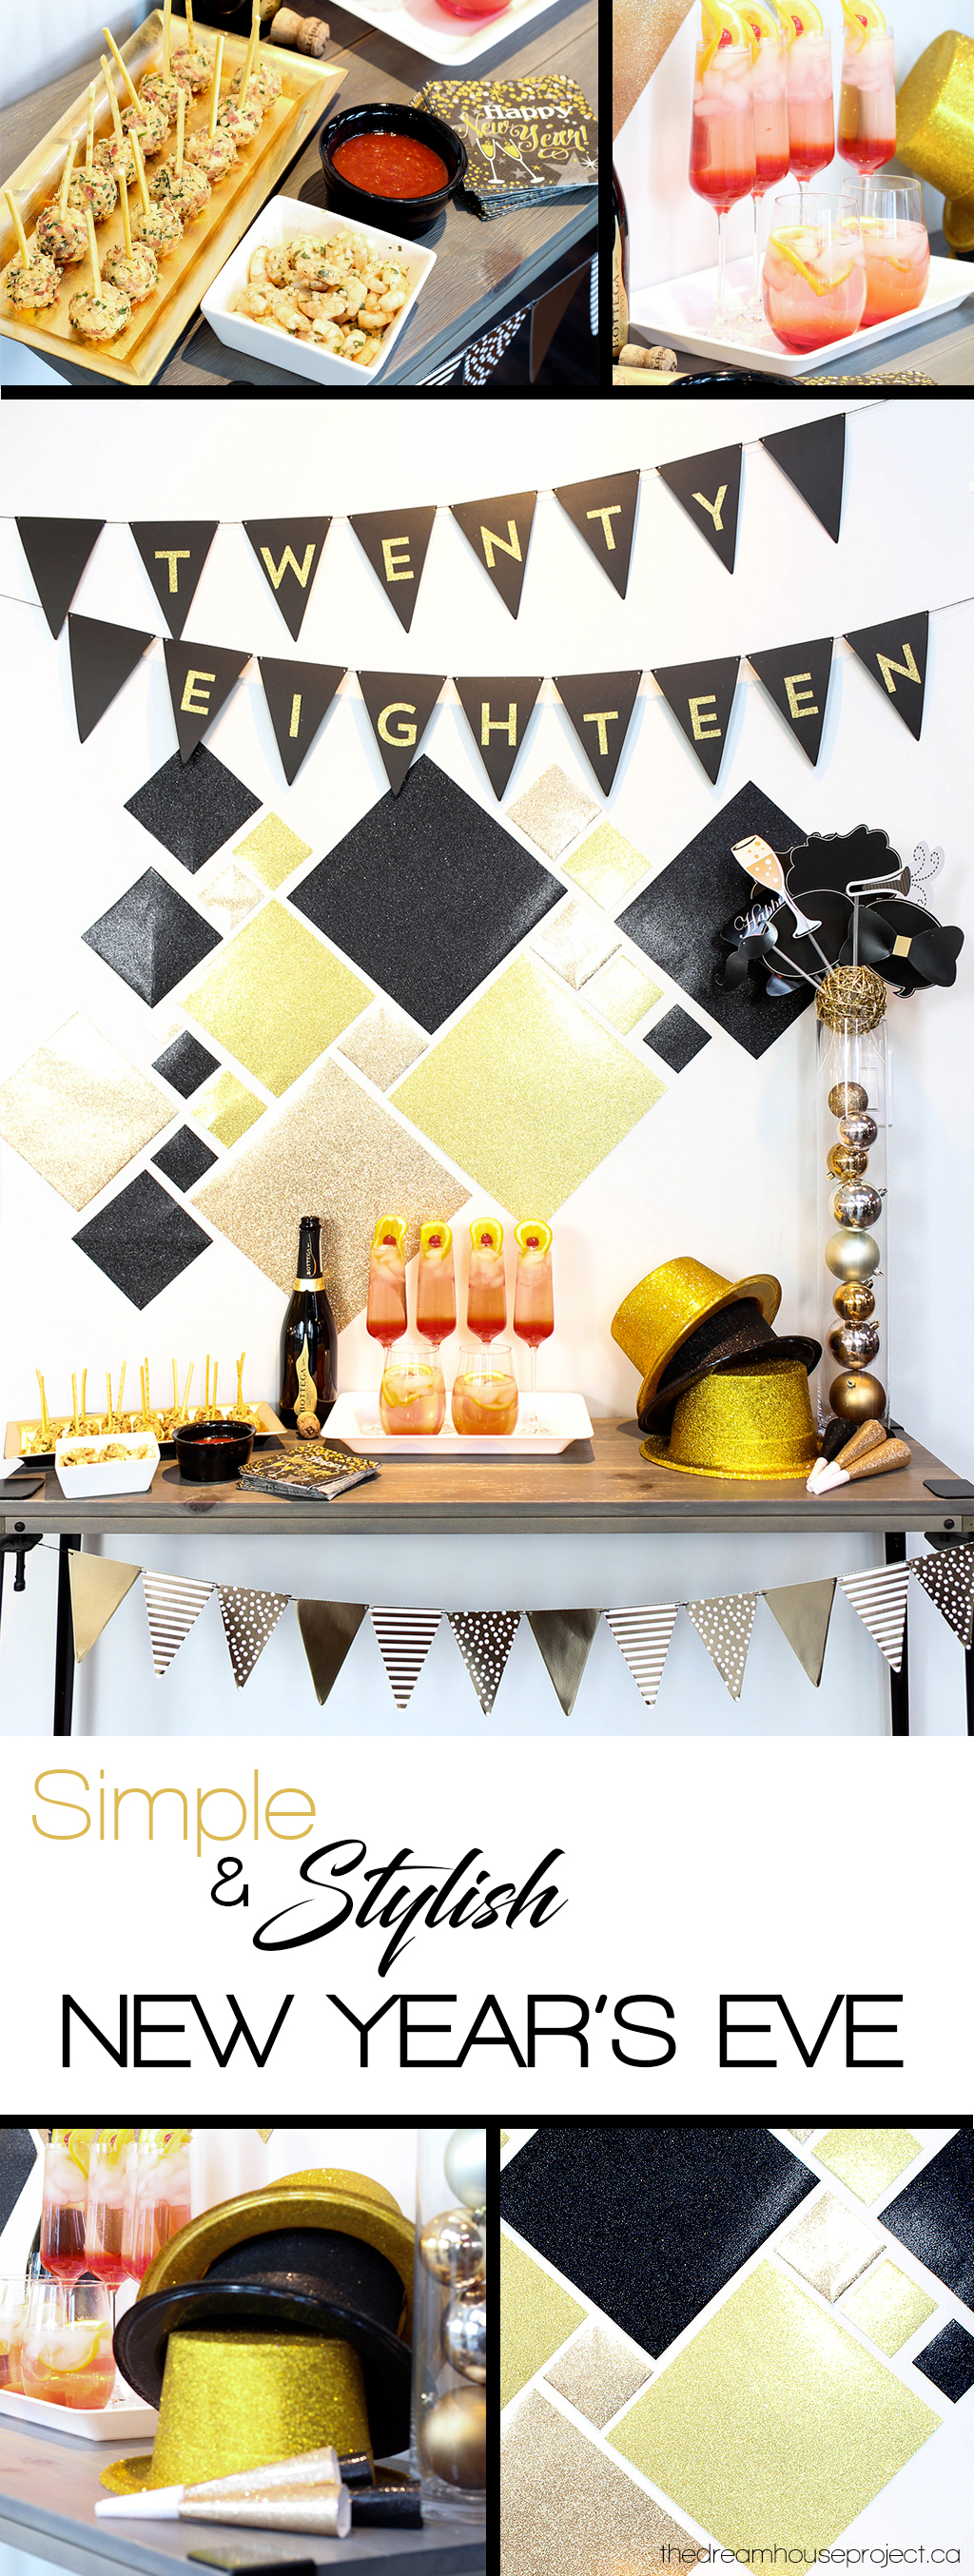 Simple Stylish New Year's Eve with black, gold & glitter decor | The Dreamhouse Project